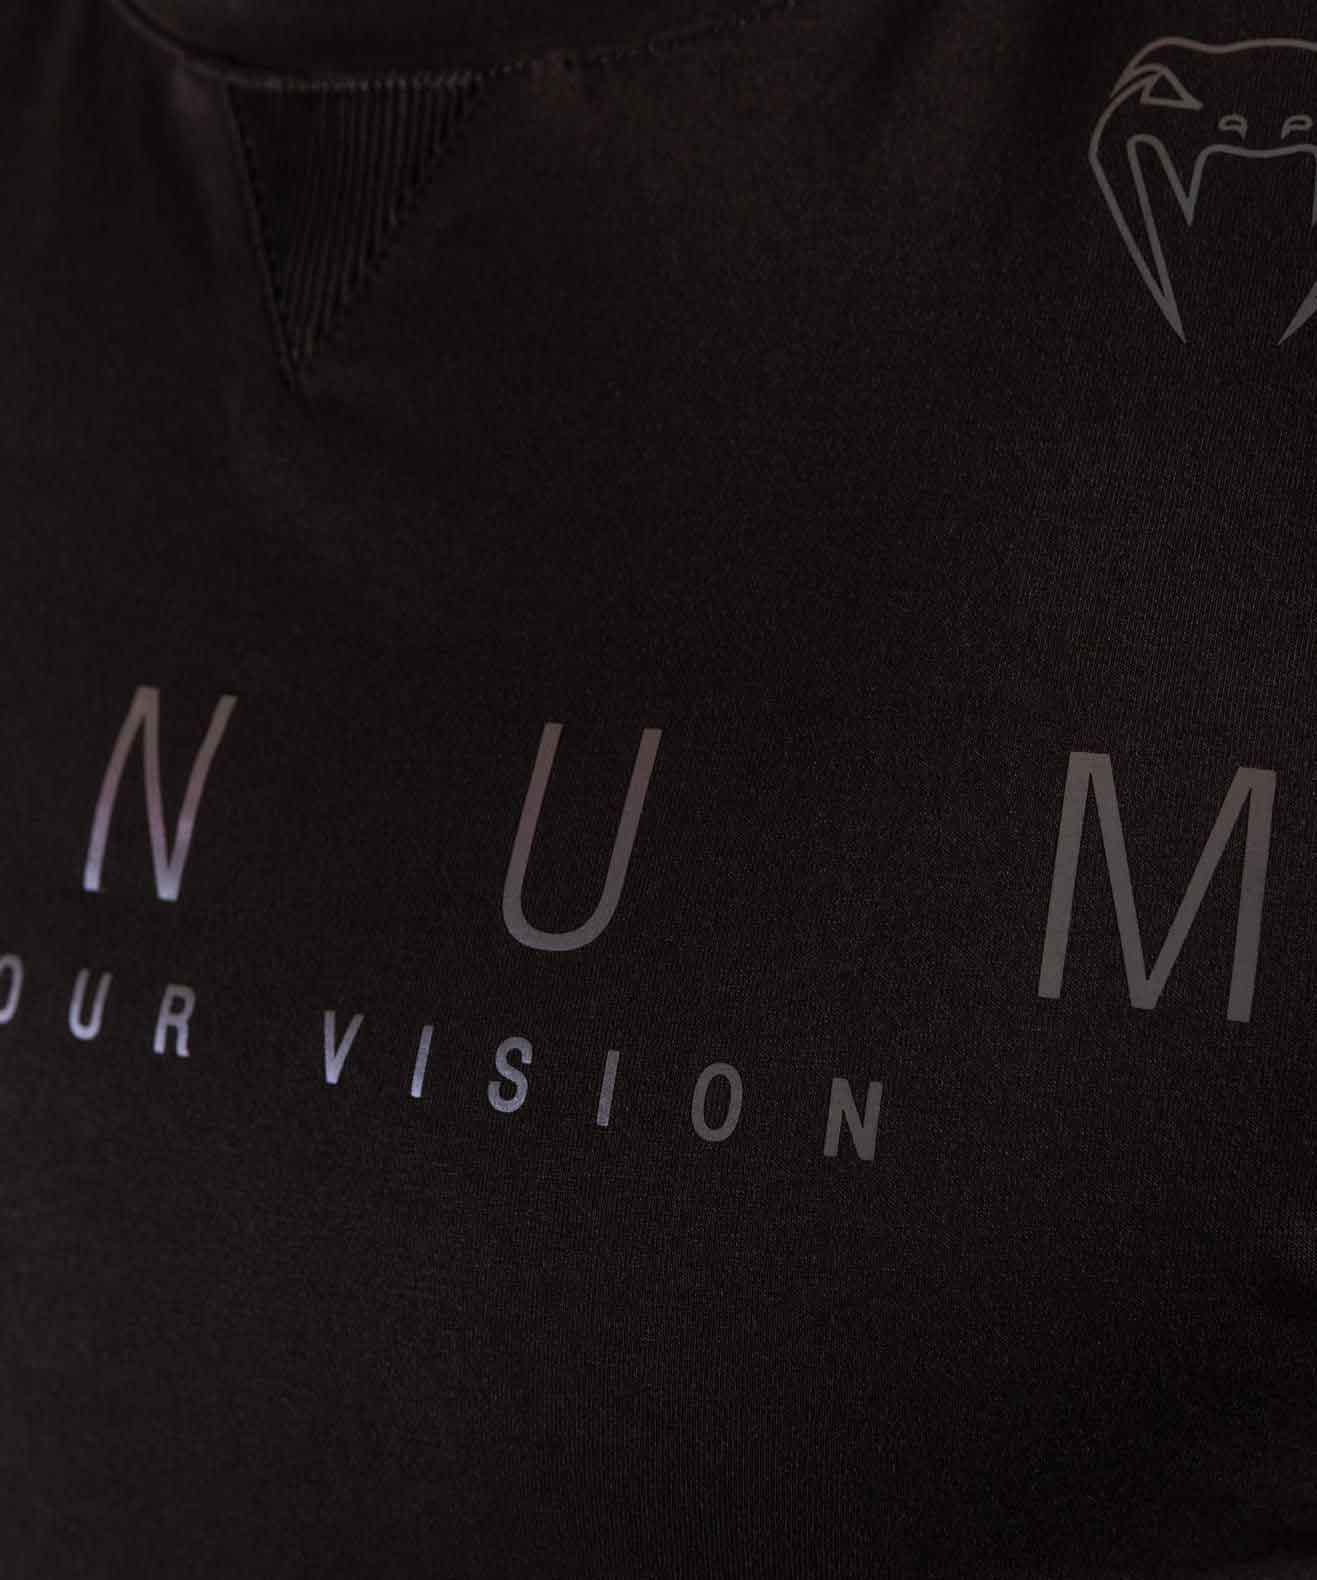 VENUM／ヴェナム　Tシャツ　　LIVEYOURVISION T-SHIRT／LIVE YOUR VISION Tシャツ（黒）